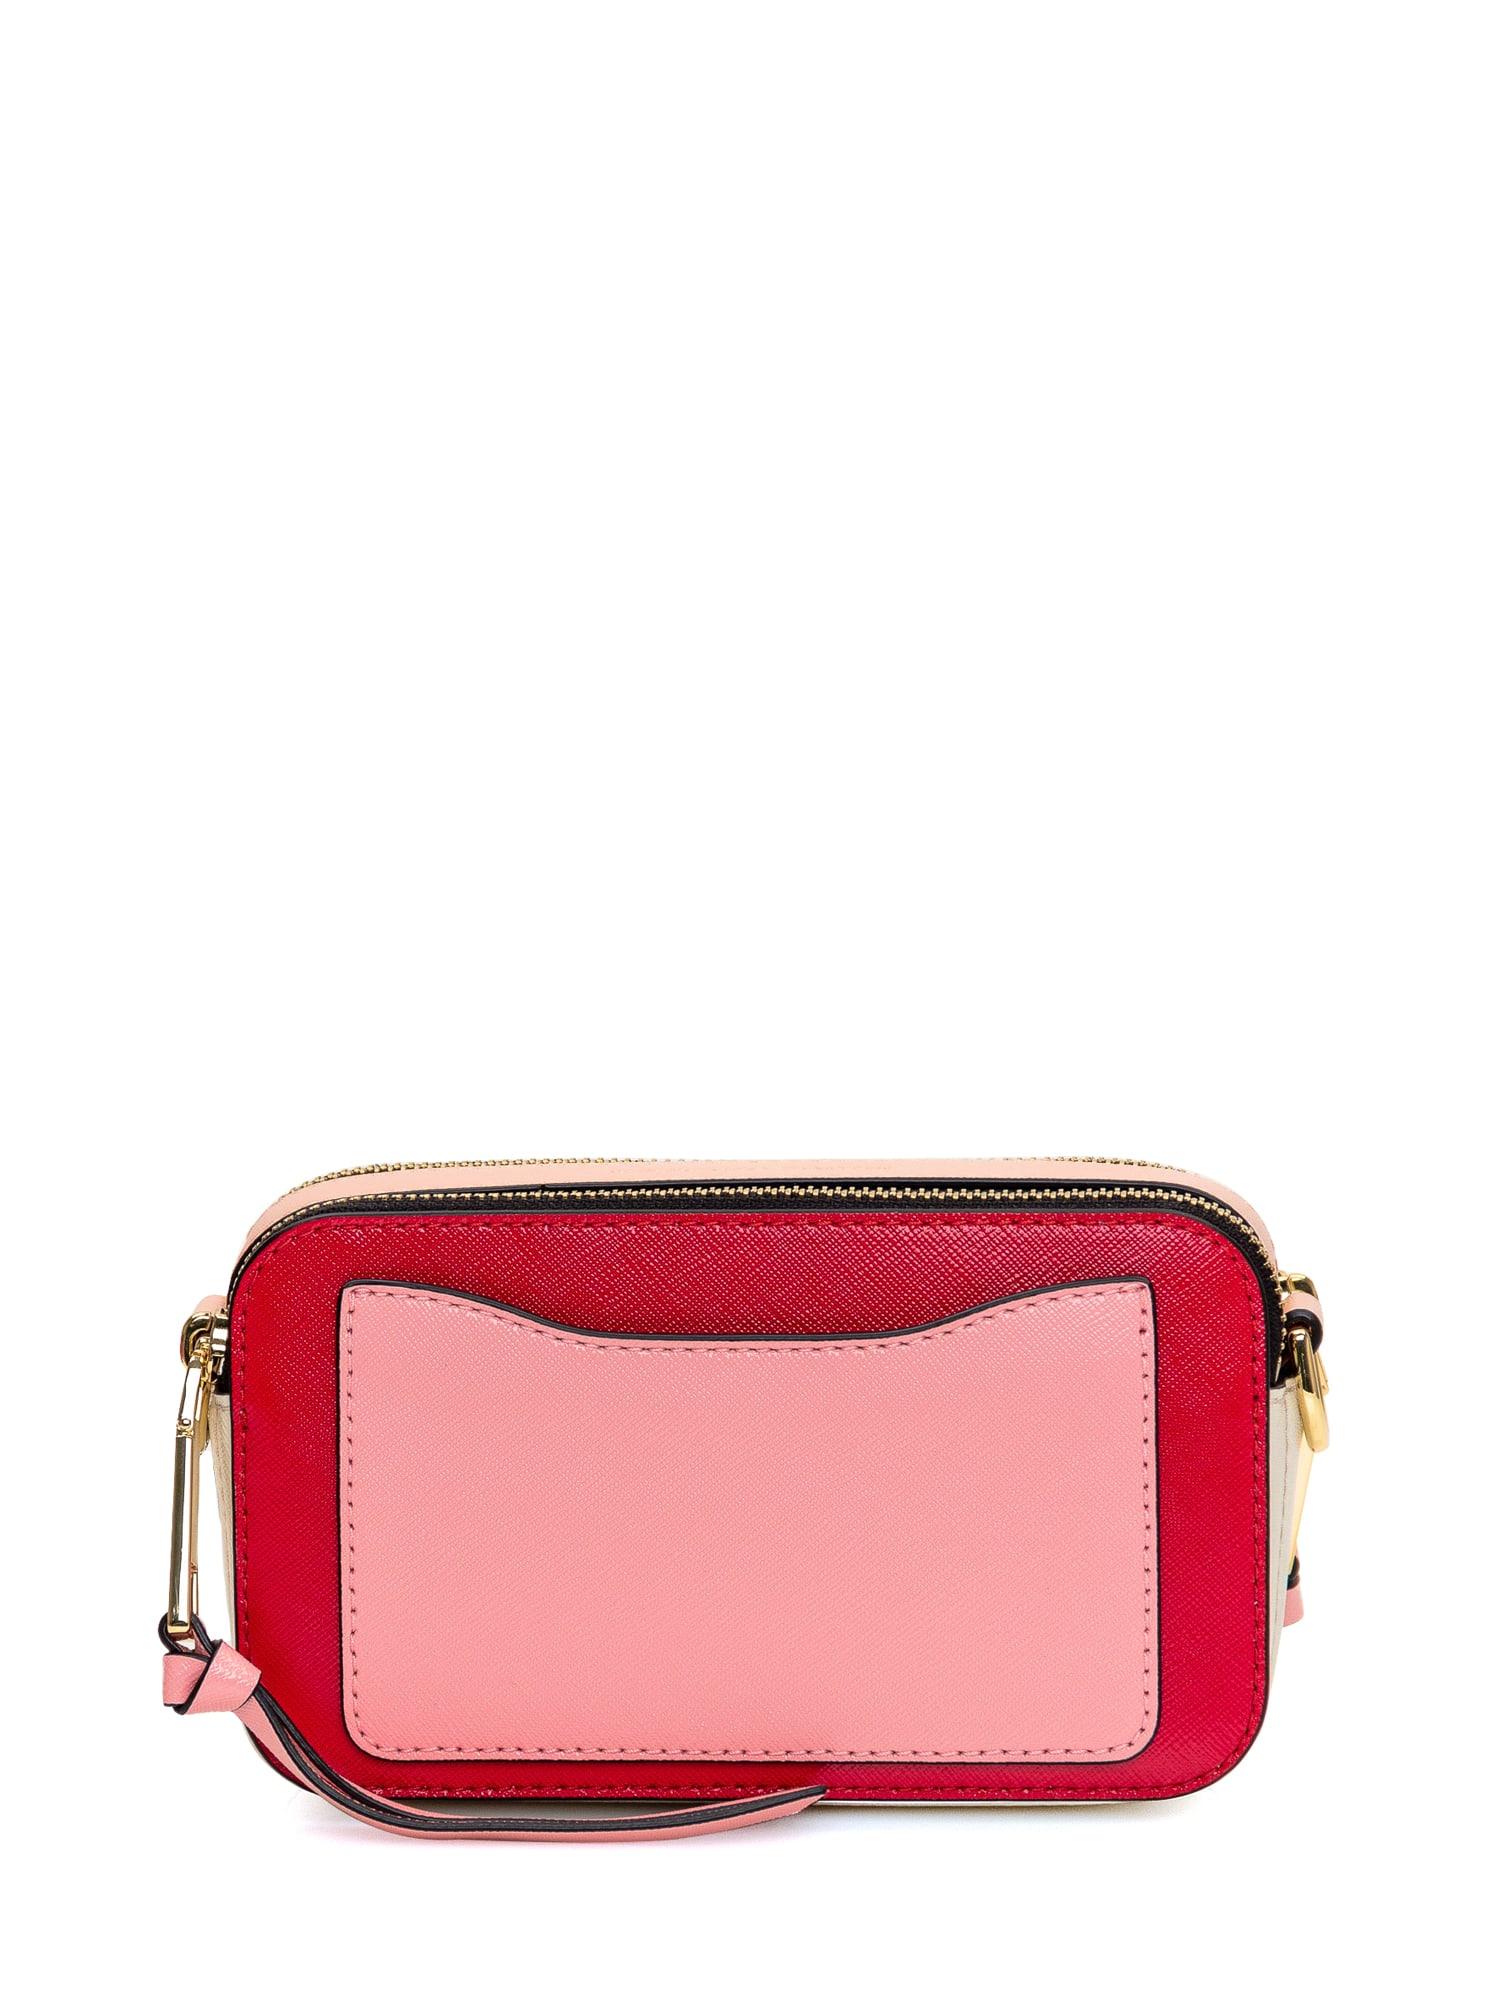 marc jacobs snapshot red